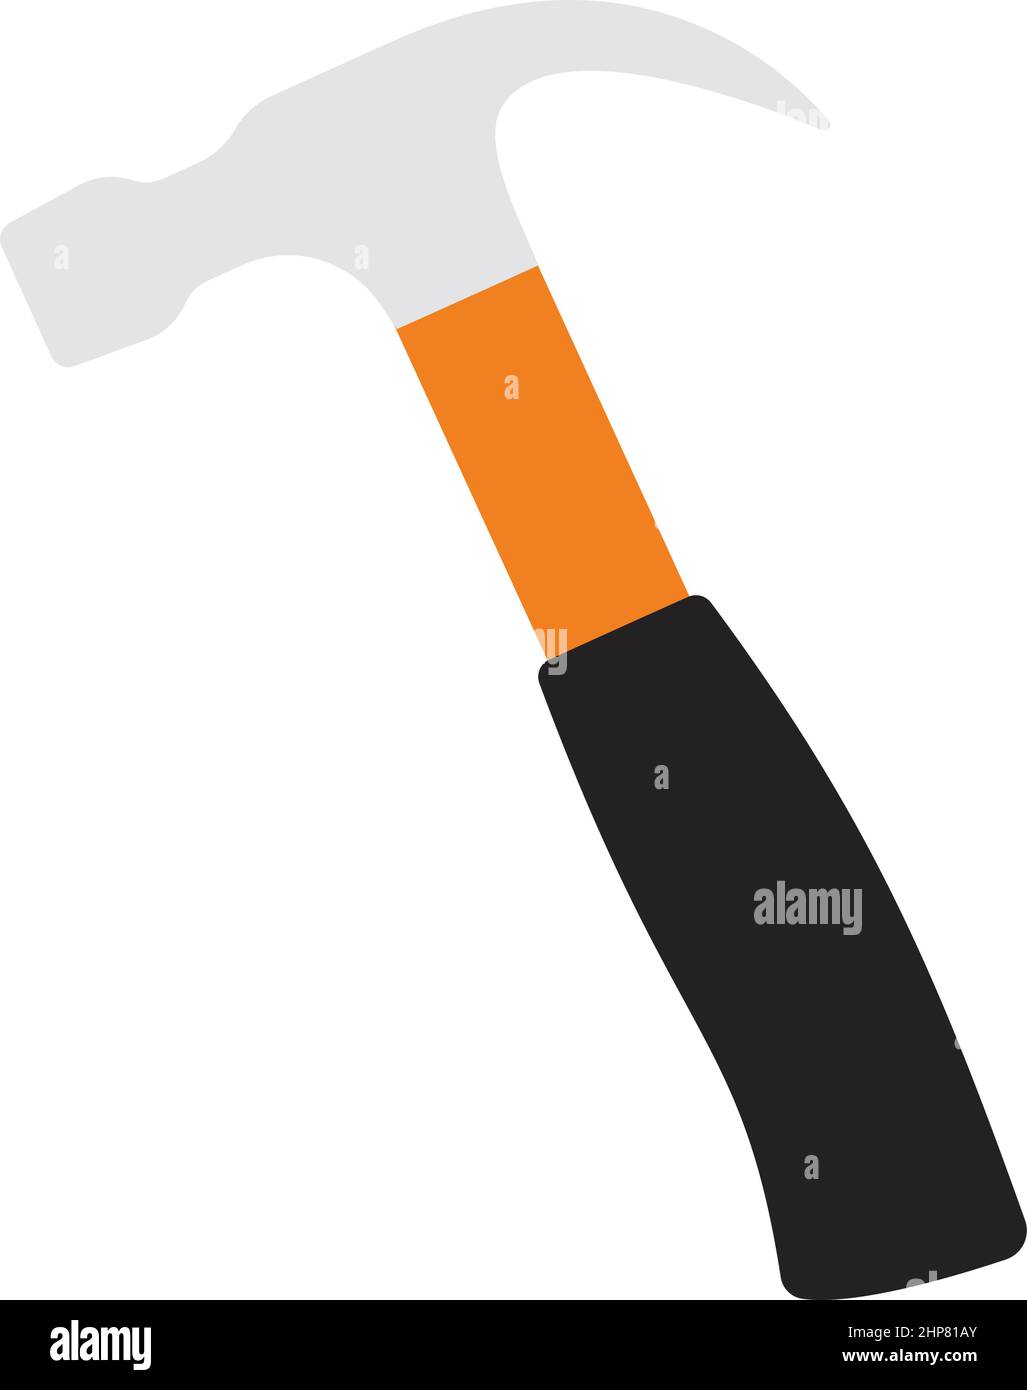 Icon Of Hammer Stock Vector